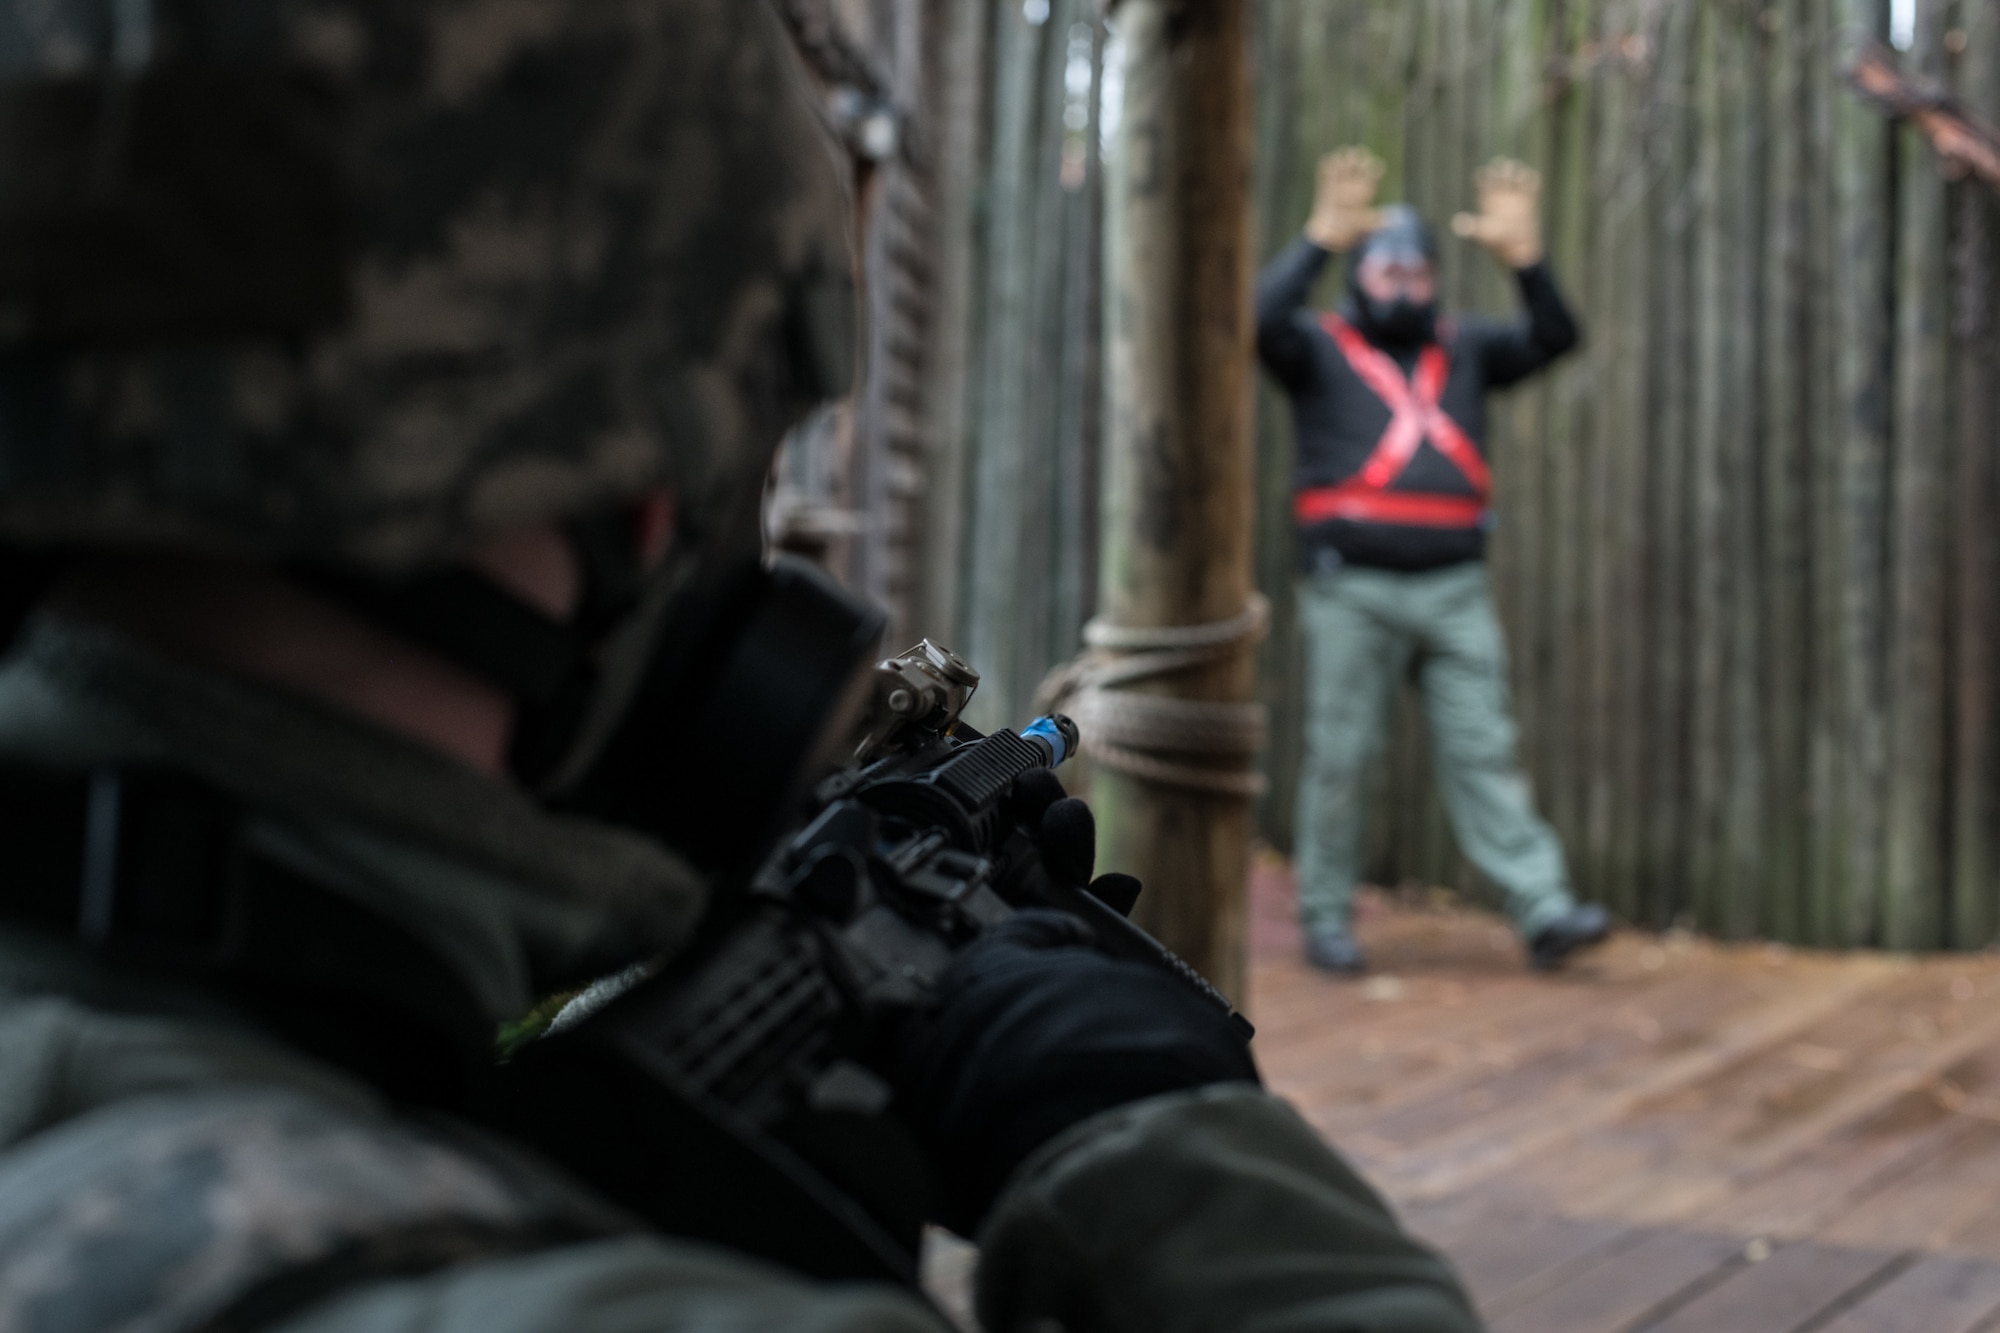 Airman 1st Class Harley Jones, a security forces Airman with the 137th Special Operations Security Forces Squadron from Oklahoma City, holds his weapon on a simulated hostage-taker as he issues verbal commands for surrender during SWAT training conducted by the Oklahoma County Sheriff's Office in Oklahoma City on Nov. 5, 2019. (U.S. Air National Guard photo by Staff Sgt. Brigette Waltermire)